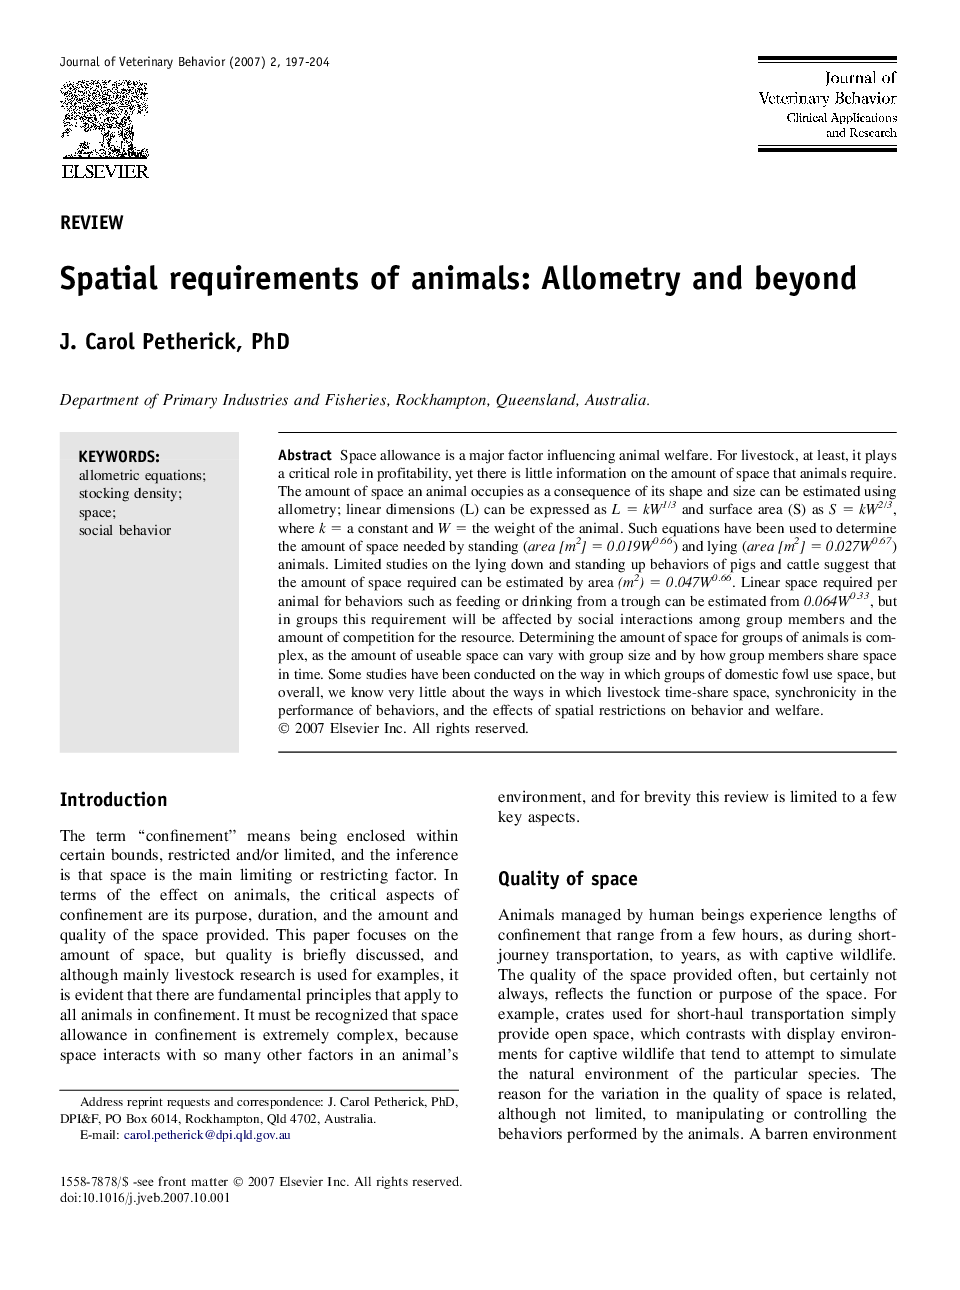 Spatial requirements of animals: Allometry and beyond